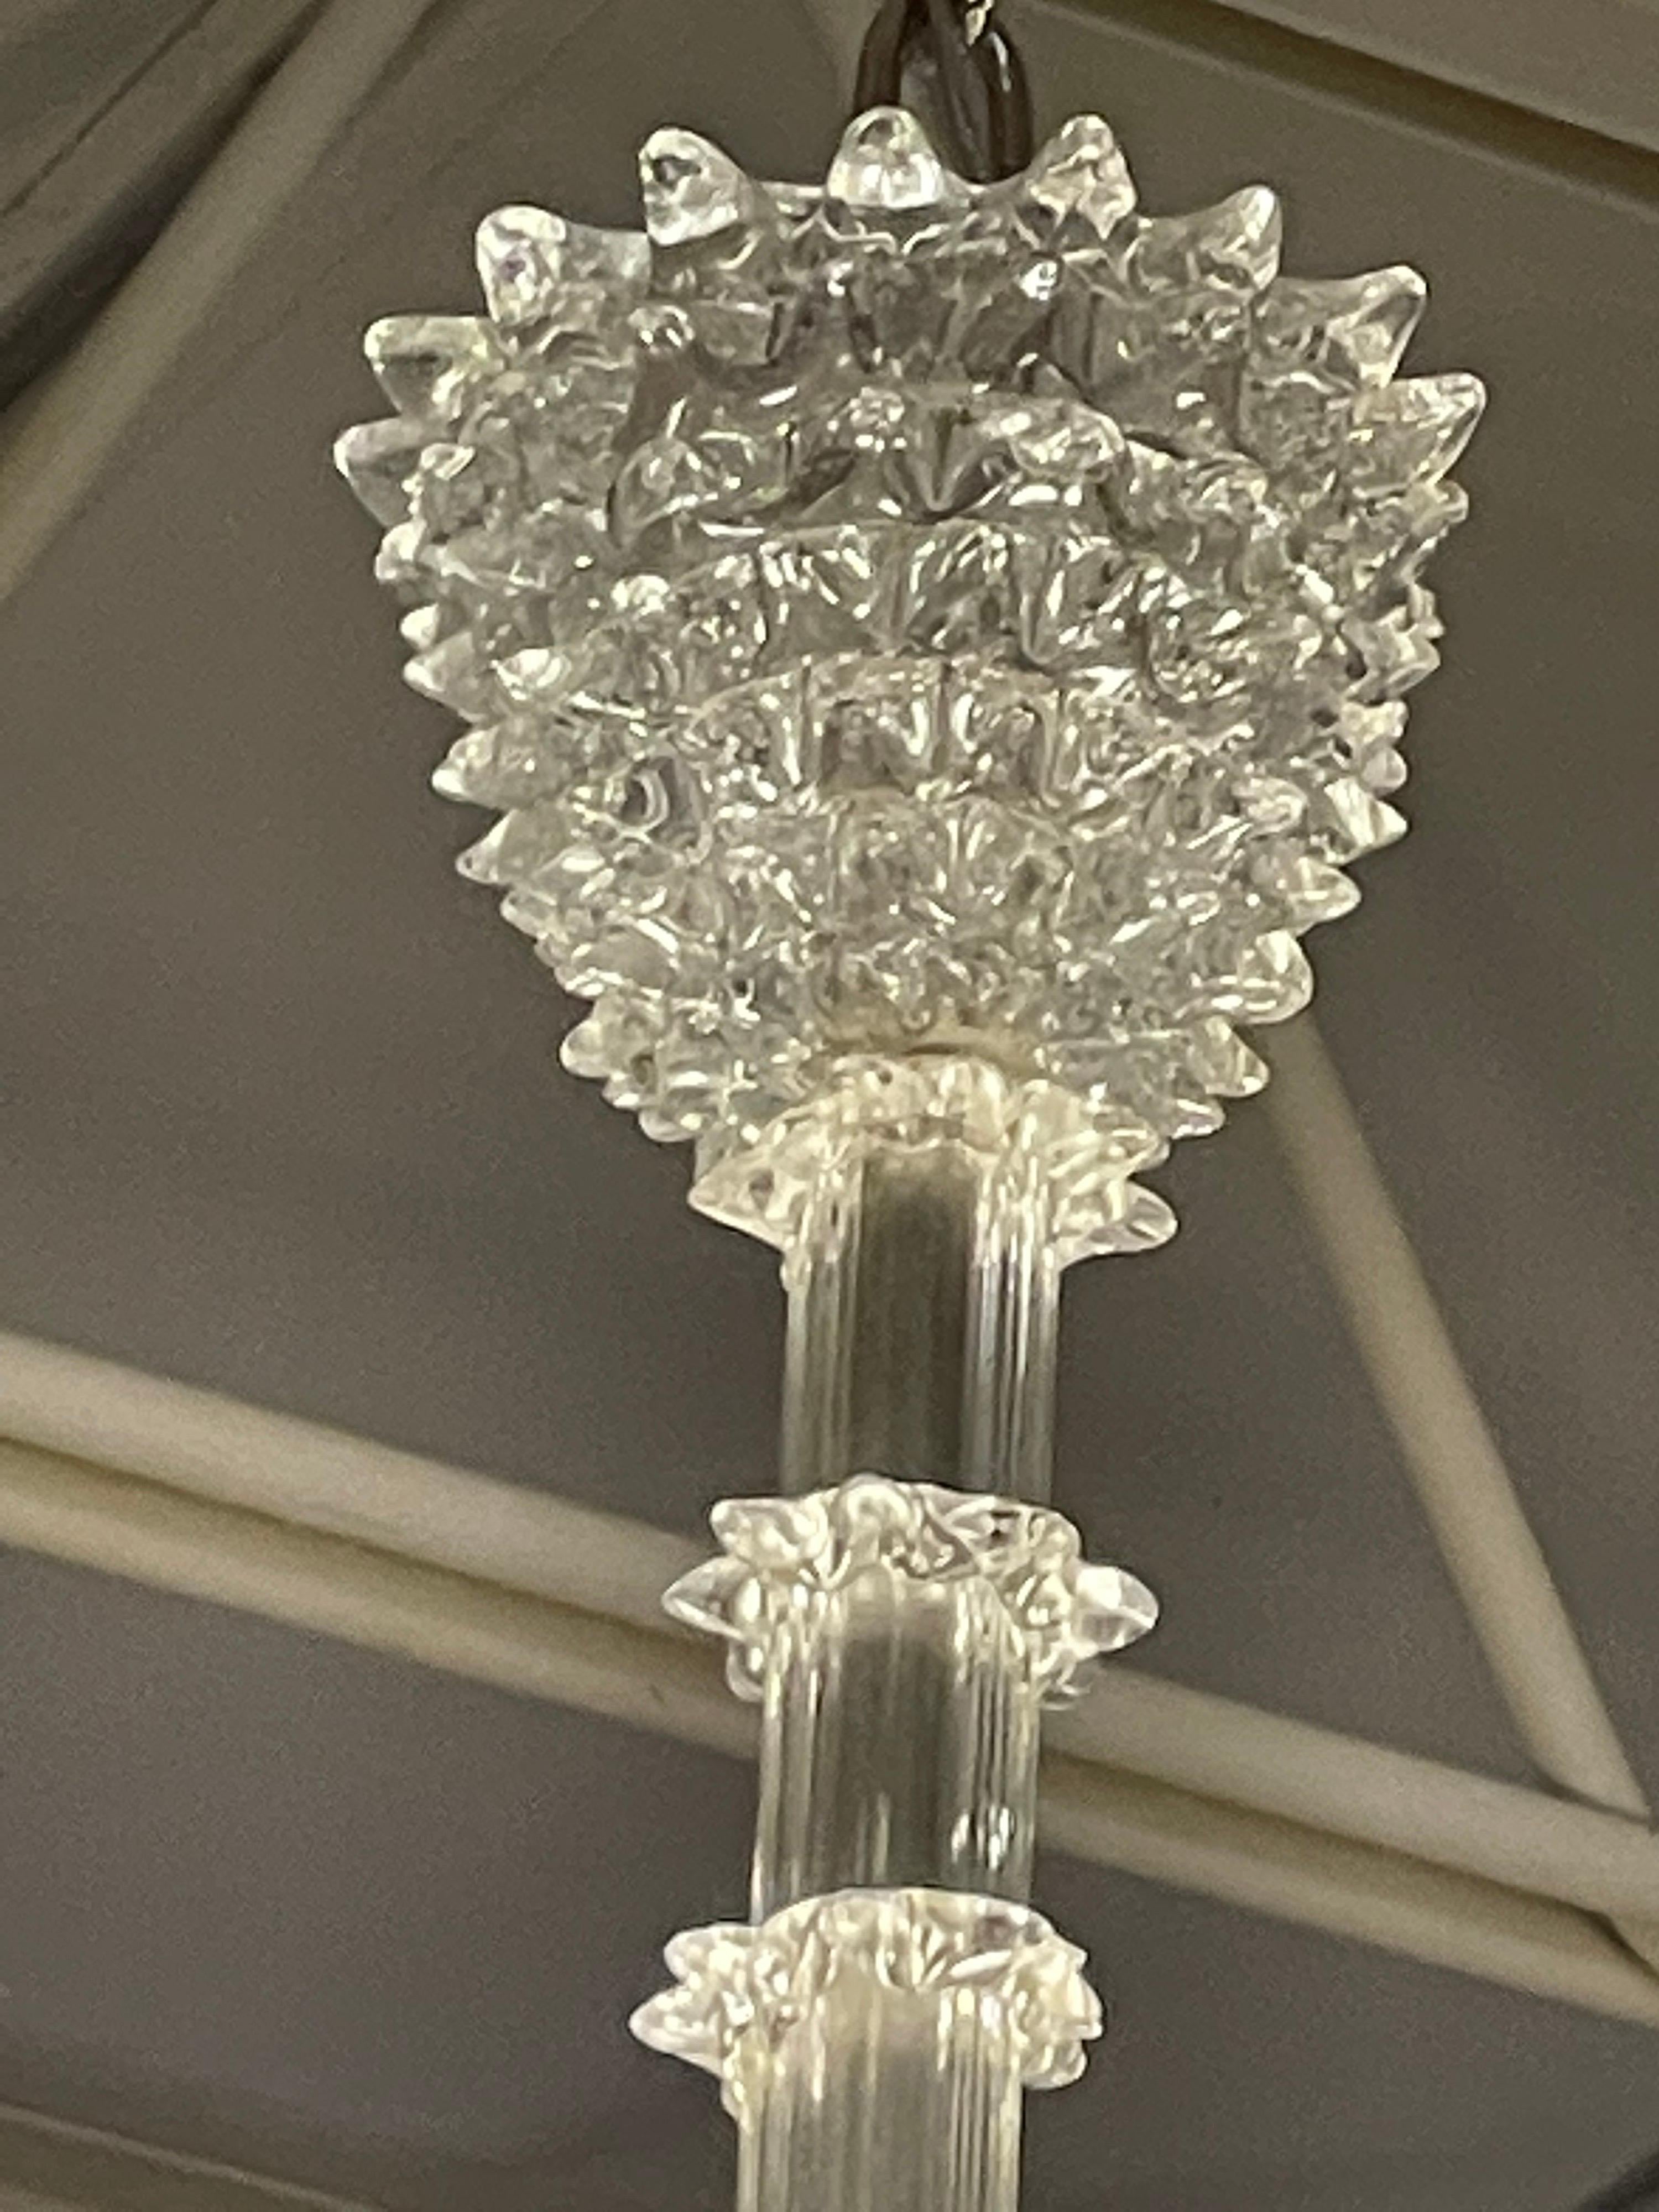 A very elegant Italian chandelier by Ercole Barovier hand blown Murano glass construction using the Rostrato technique. The details abound on this beauty. This design was first presented at The Biennale di Venezia in 1938.